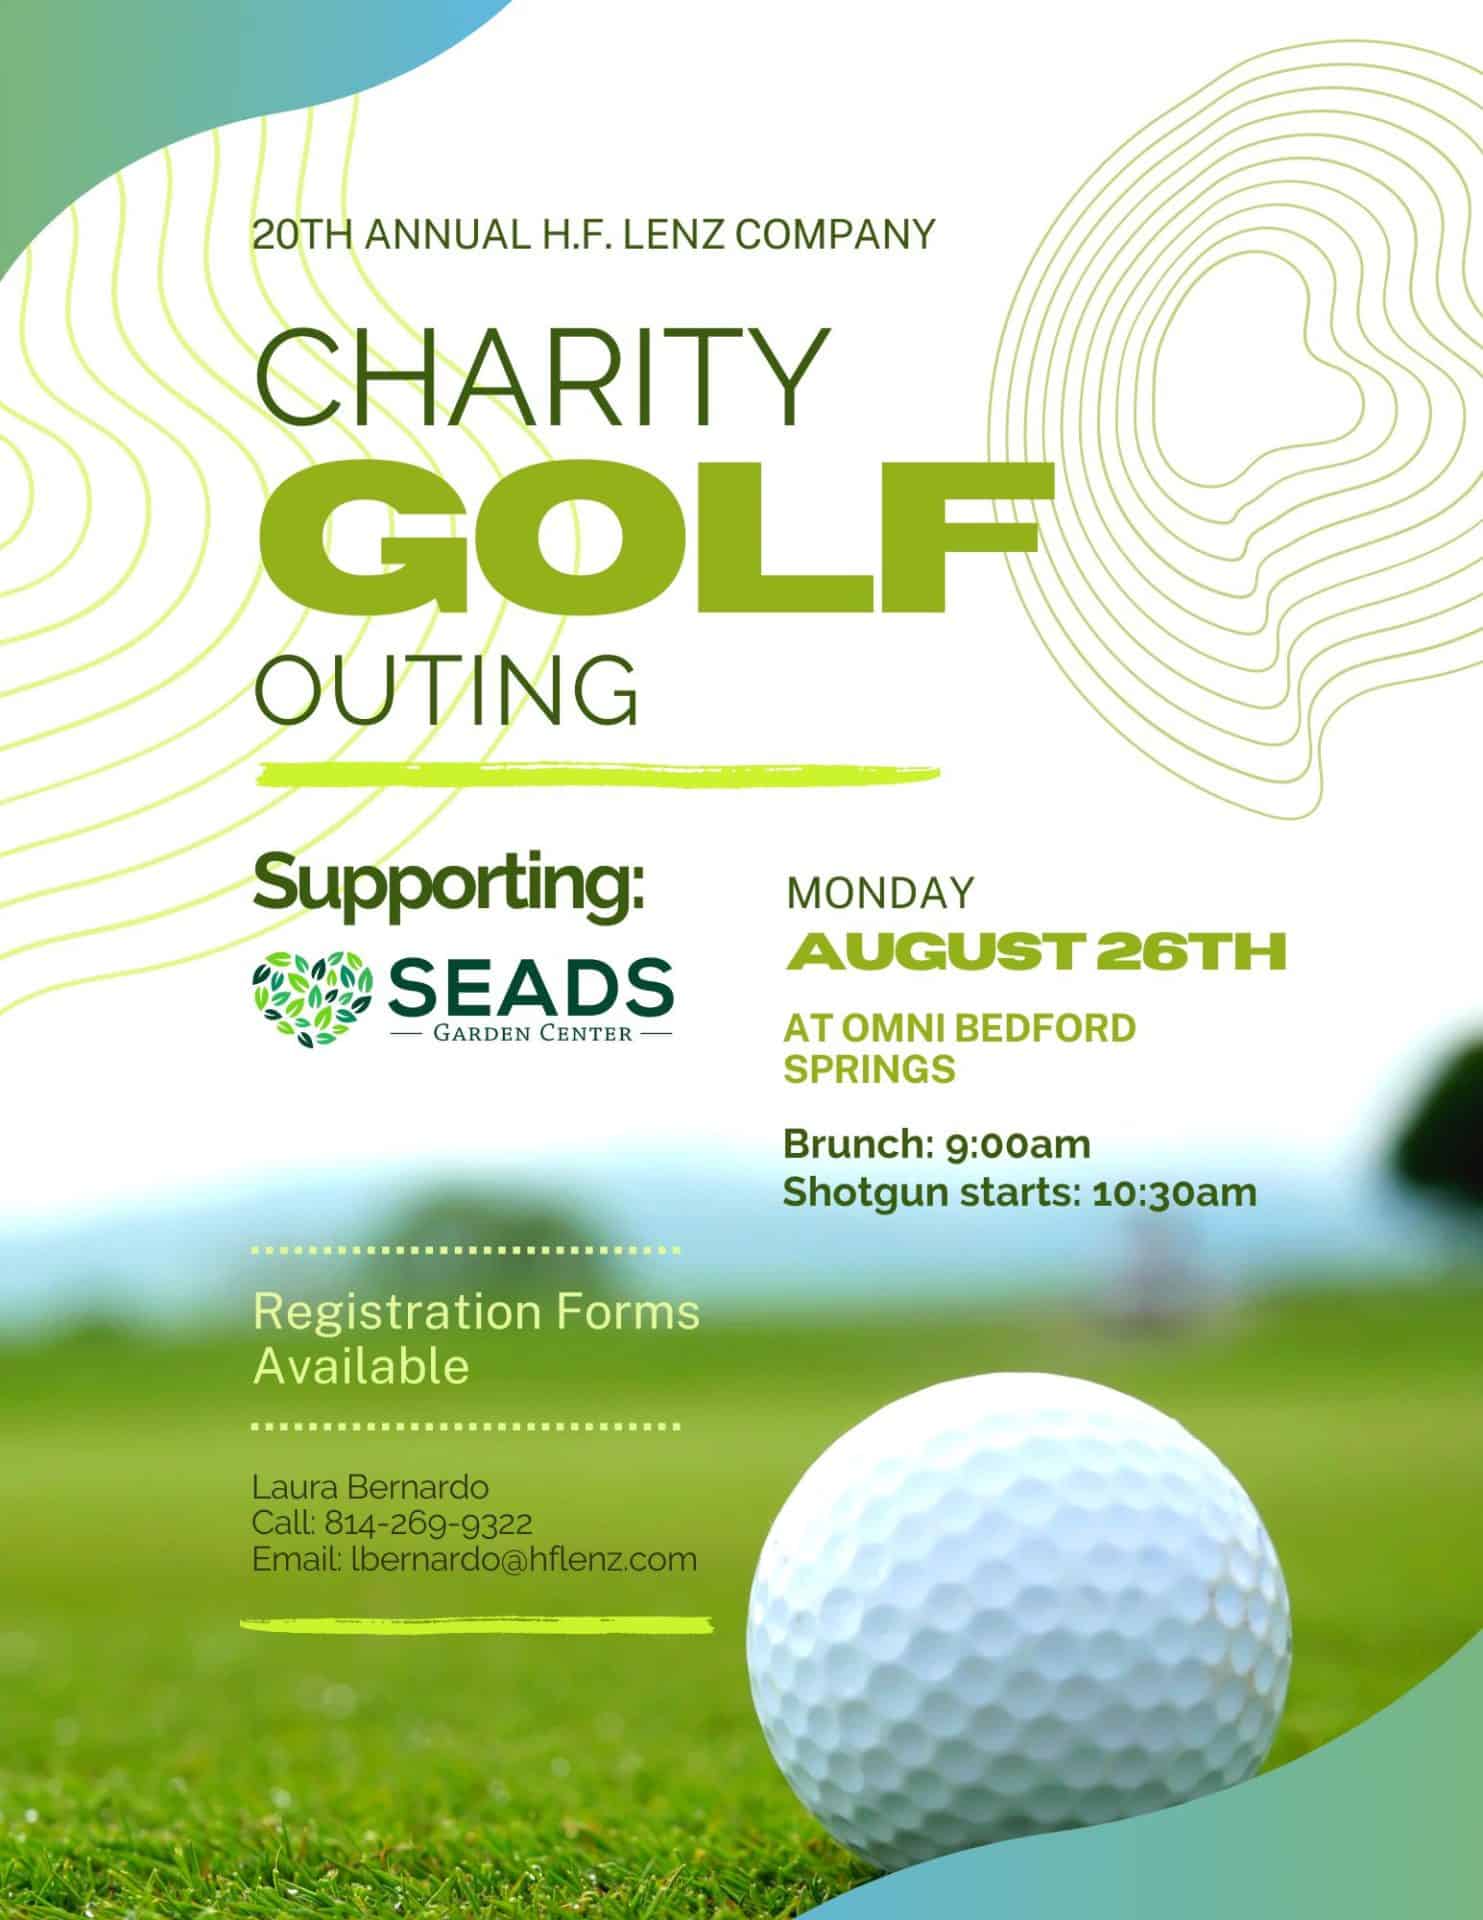 H.F. Lenz Charity Golf Outing